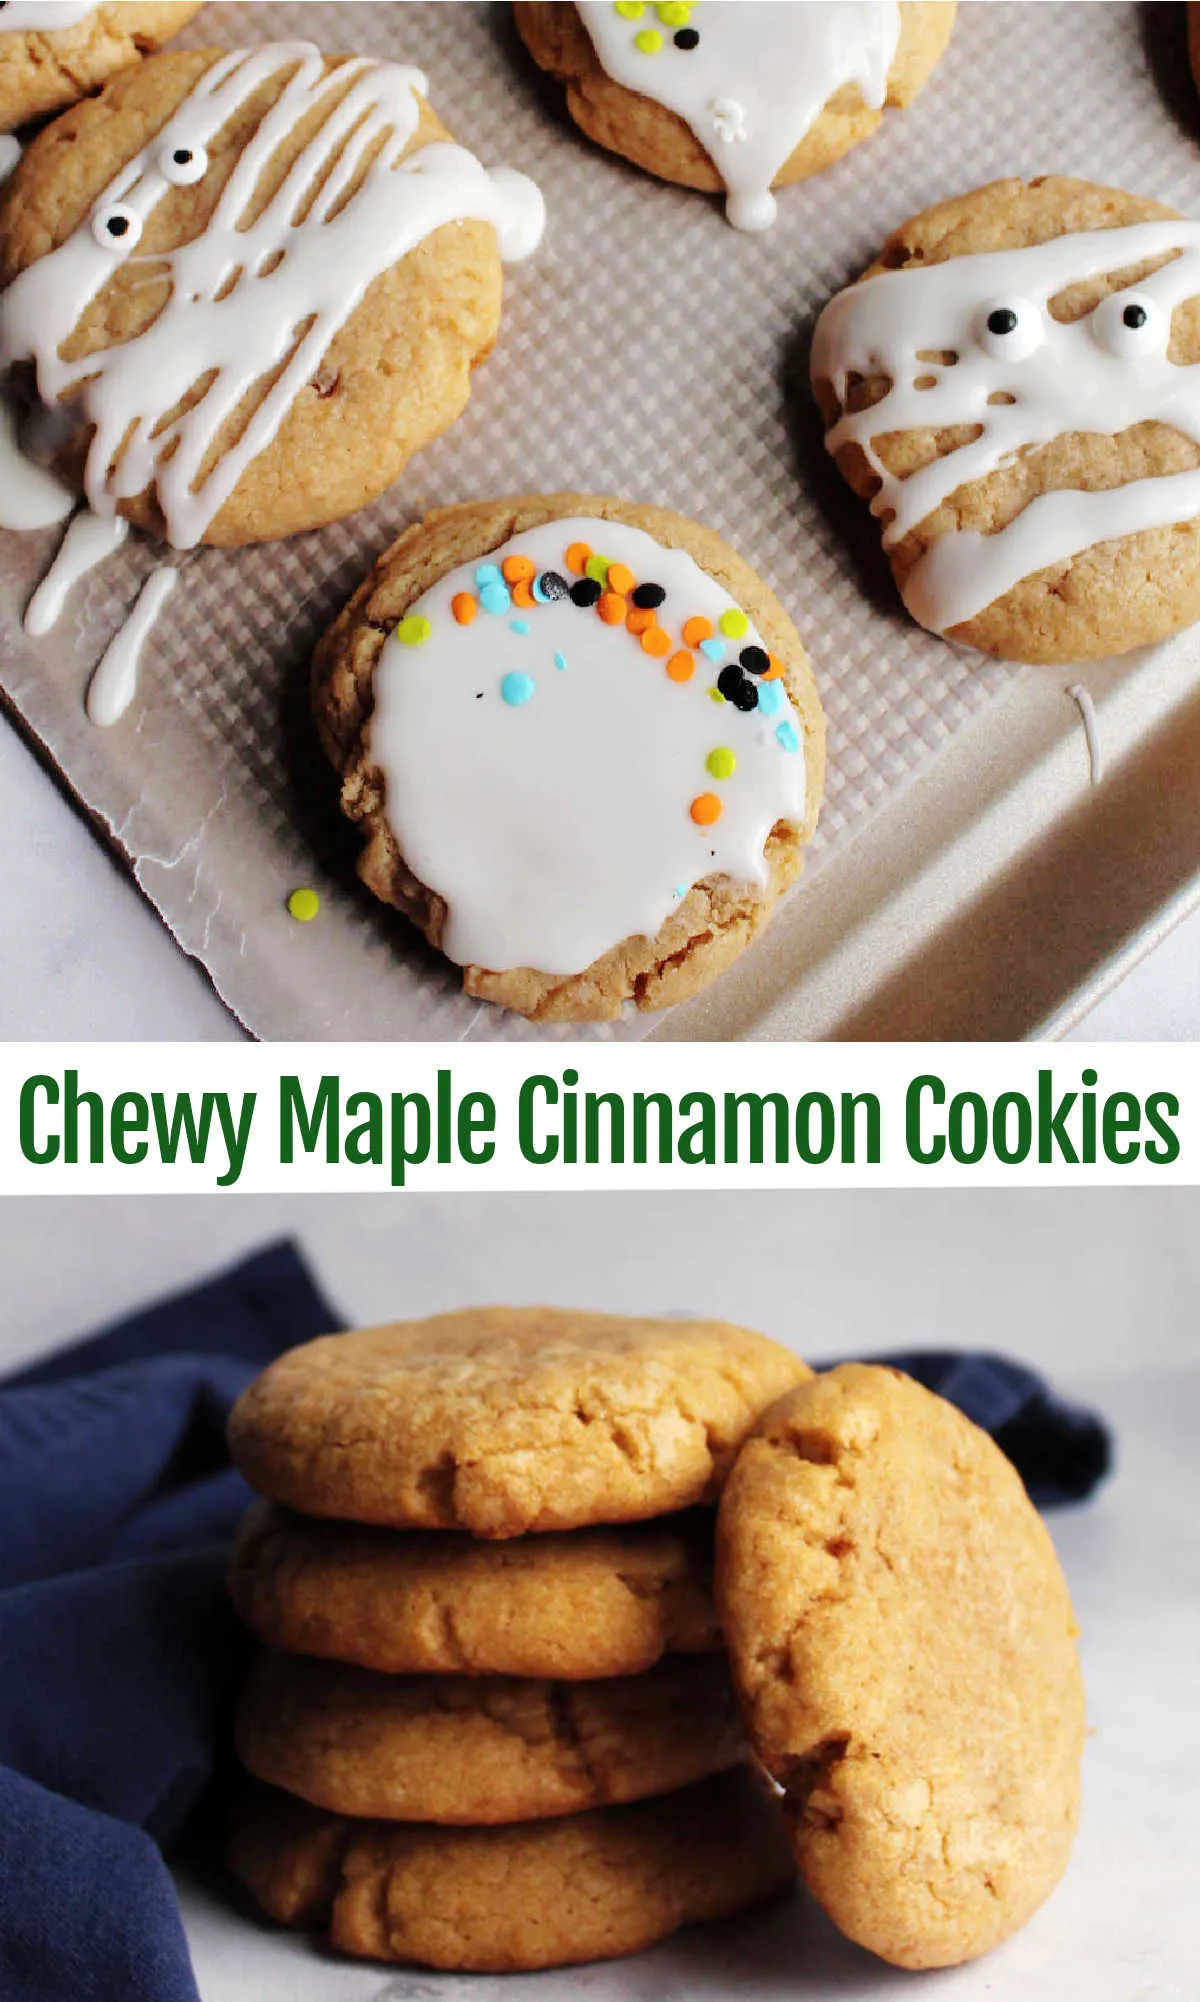 These cookies are kissed with the warmth of maple and brown sugar and a hint of cinnamon. They are big and chewy and oh so good!